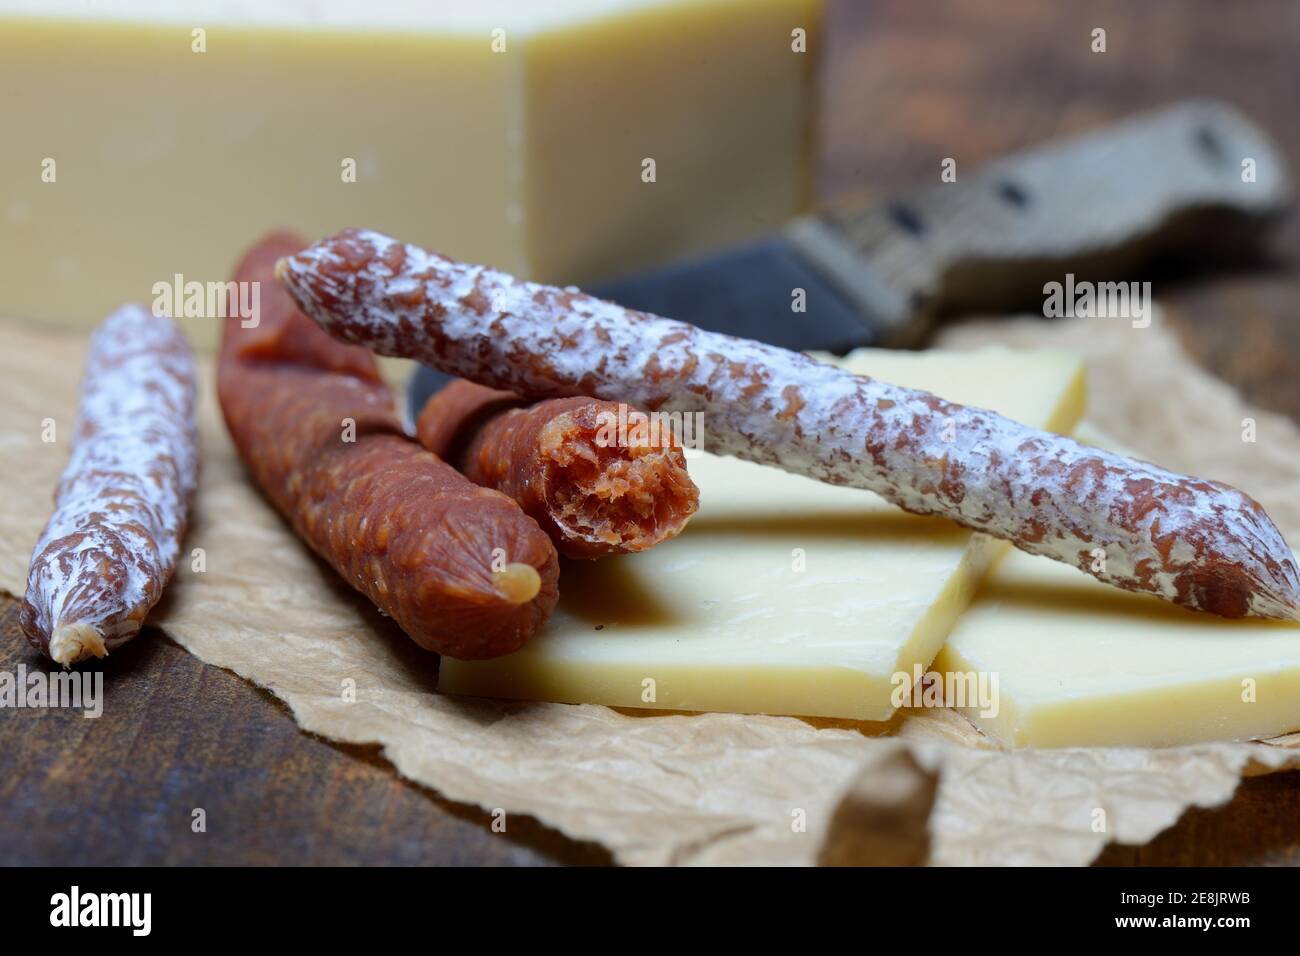 Different kinds of sausages and cheese slices Stock Photo